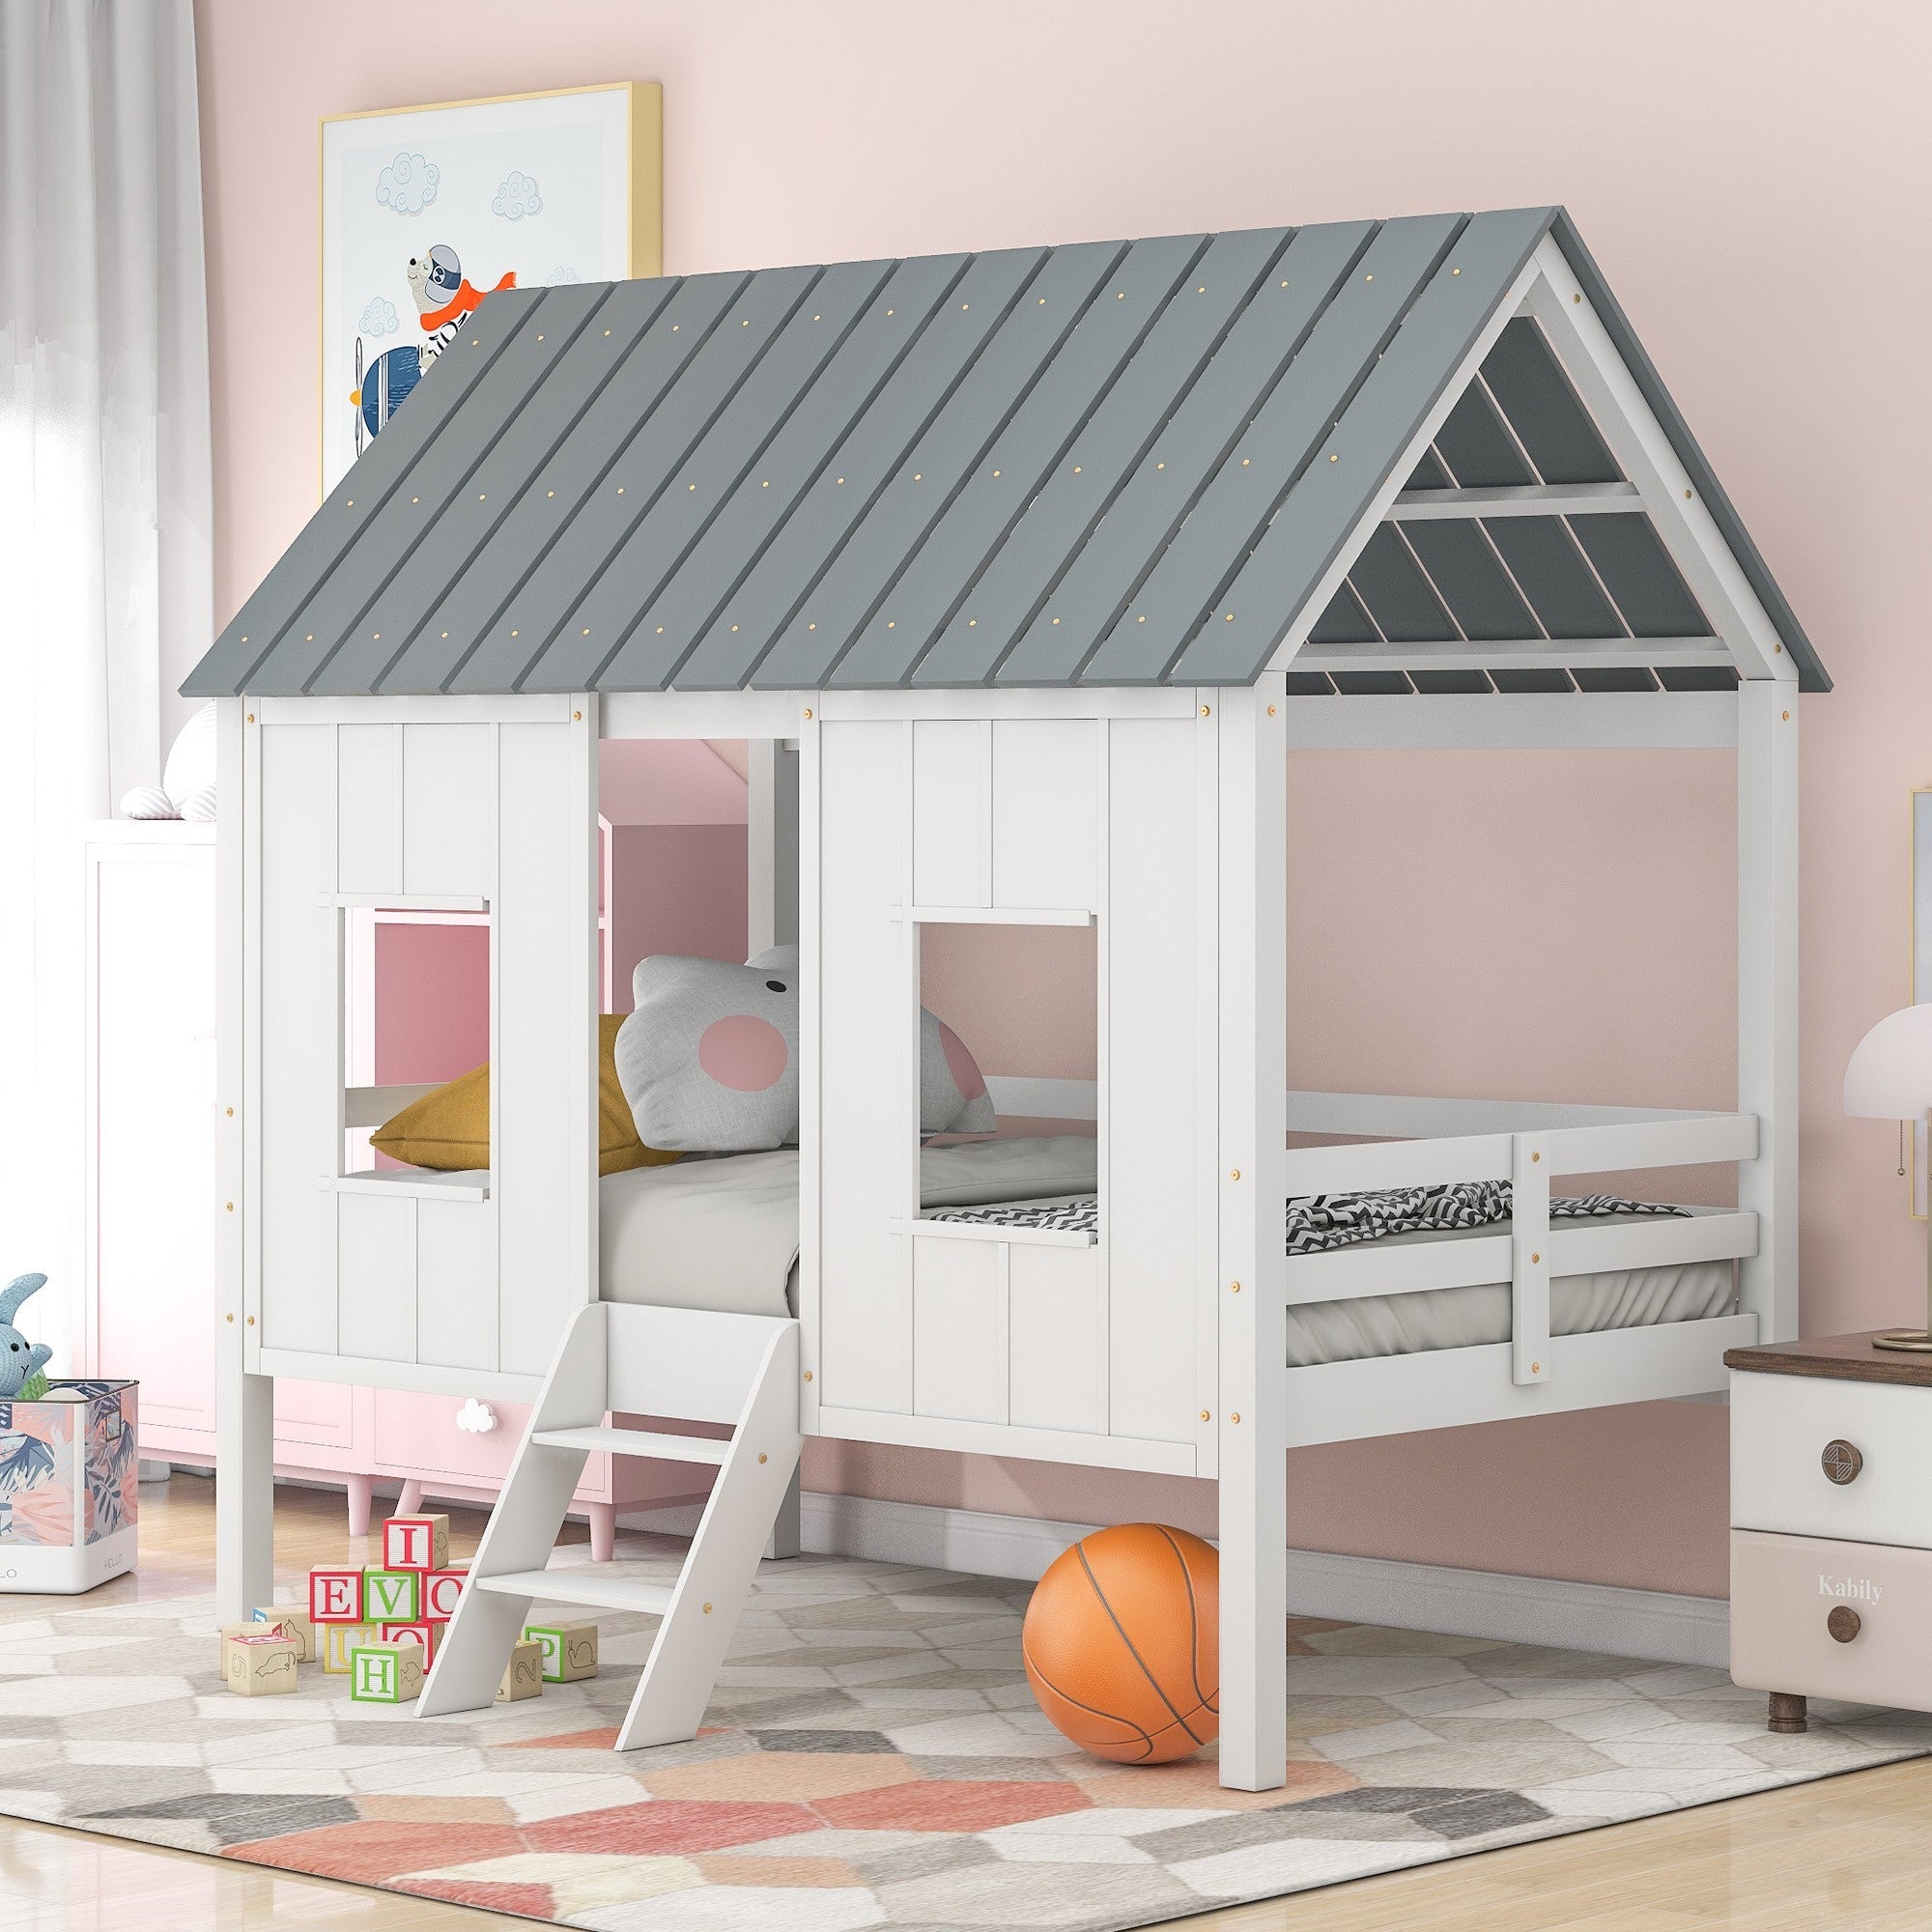 Playhouse-with-Windows-and-Roof-White-Twin-Size-Low-Loft-Bed-Beds-&-Bed-Frames